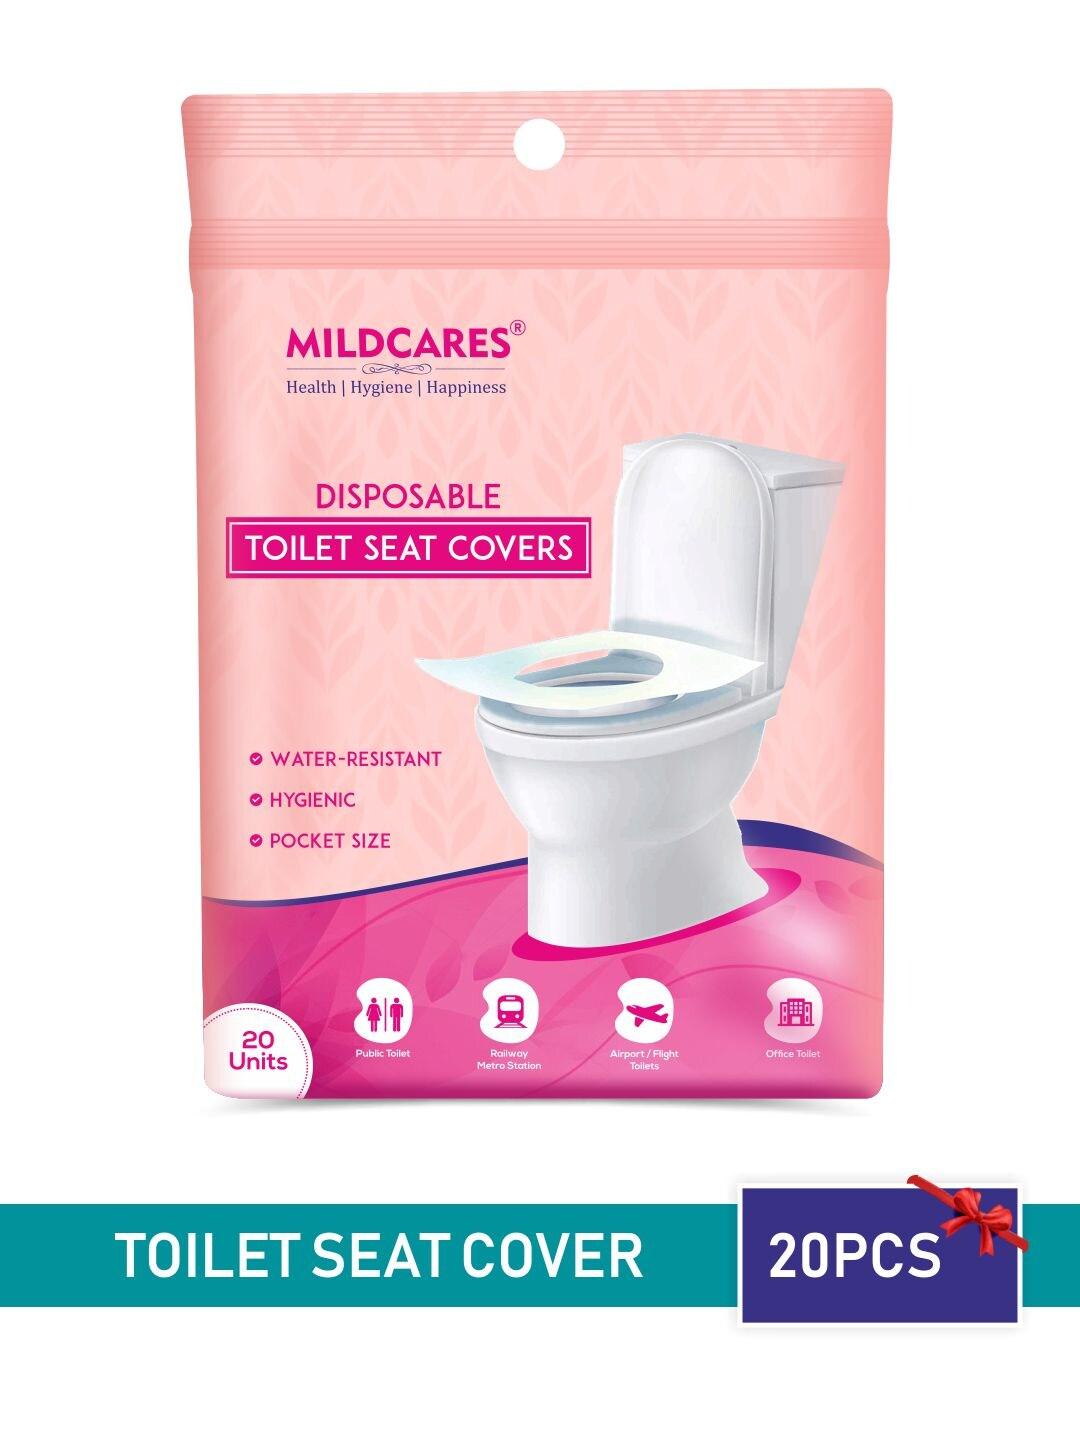 MILDCARES Disposable Toilet Seat Covers to Protects Against Germs - 20 Sheets